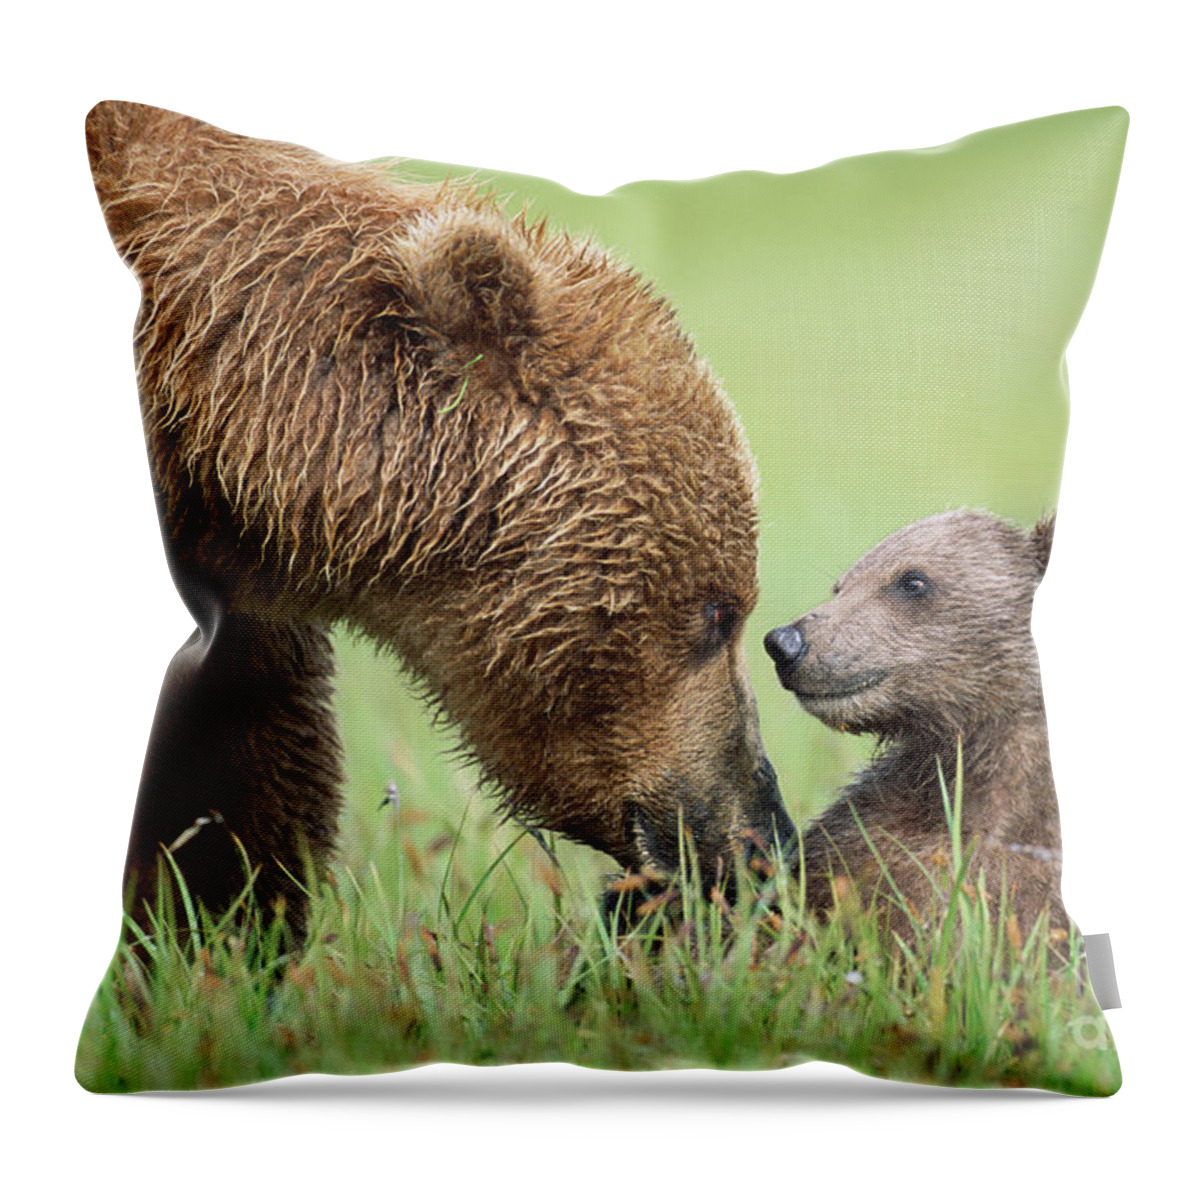 00345260 Throw Pillow featuring the photograph Grizzly Bear And Cub in Katmai by Yva Momatiuk John Eastcott